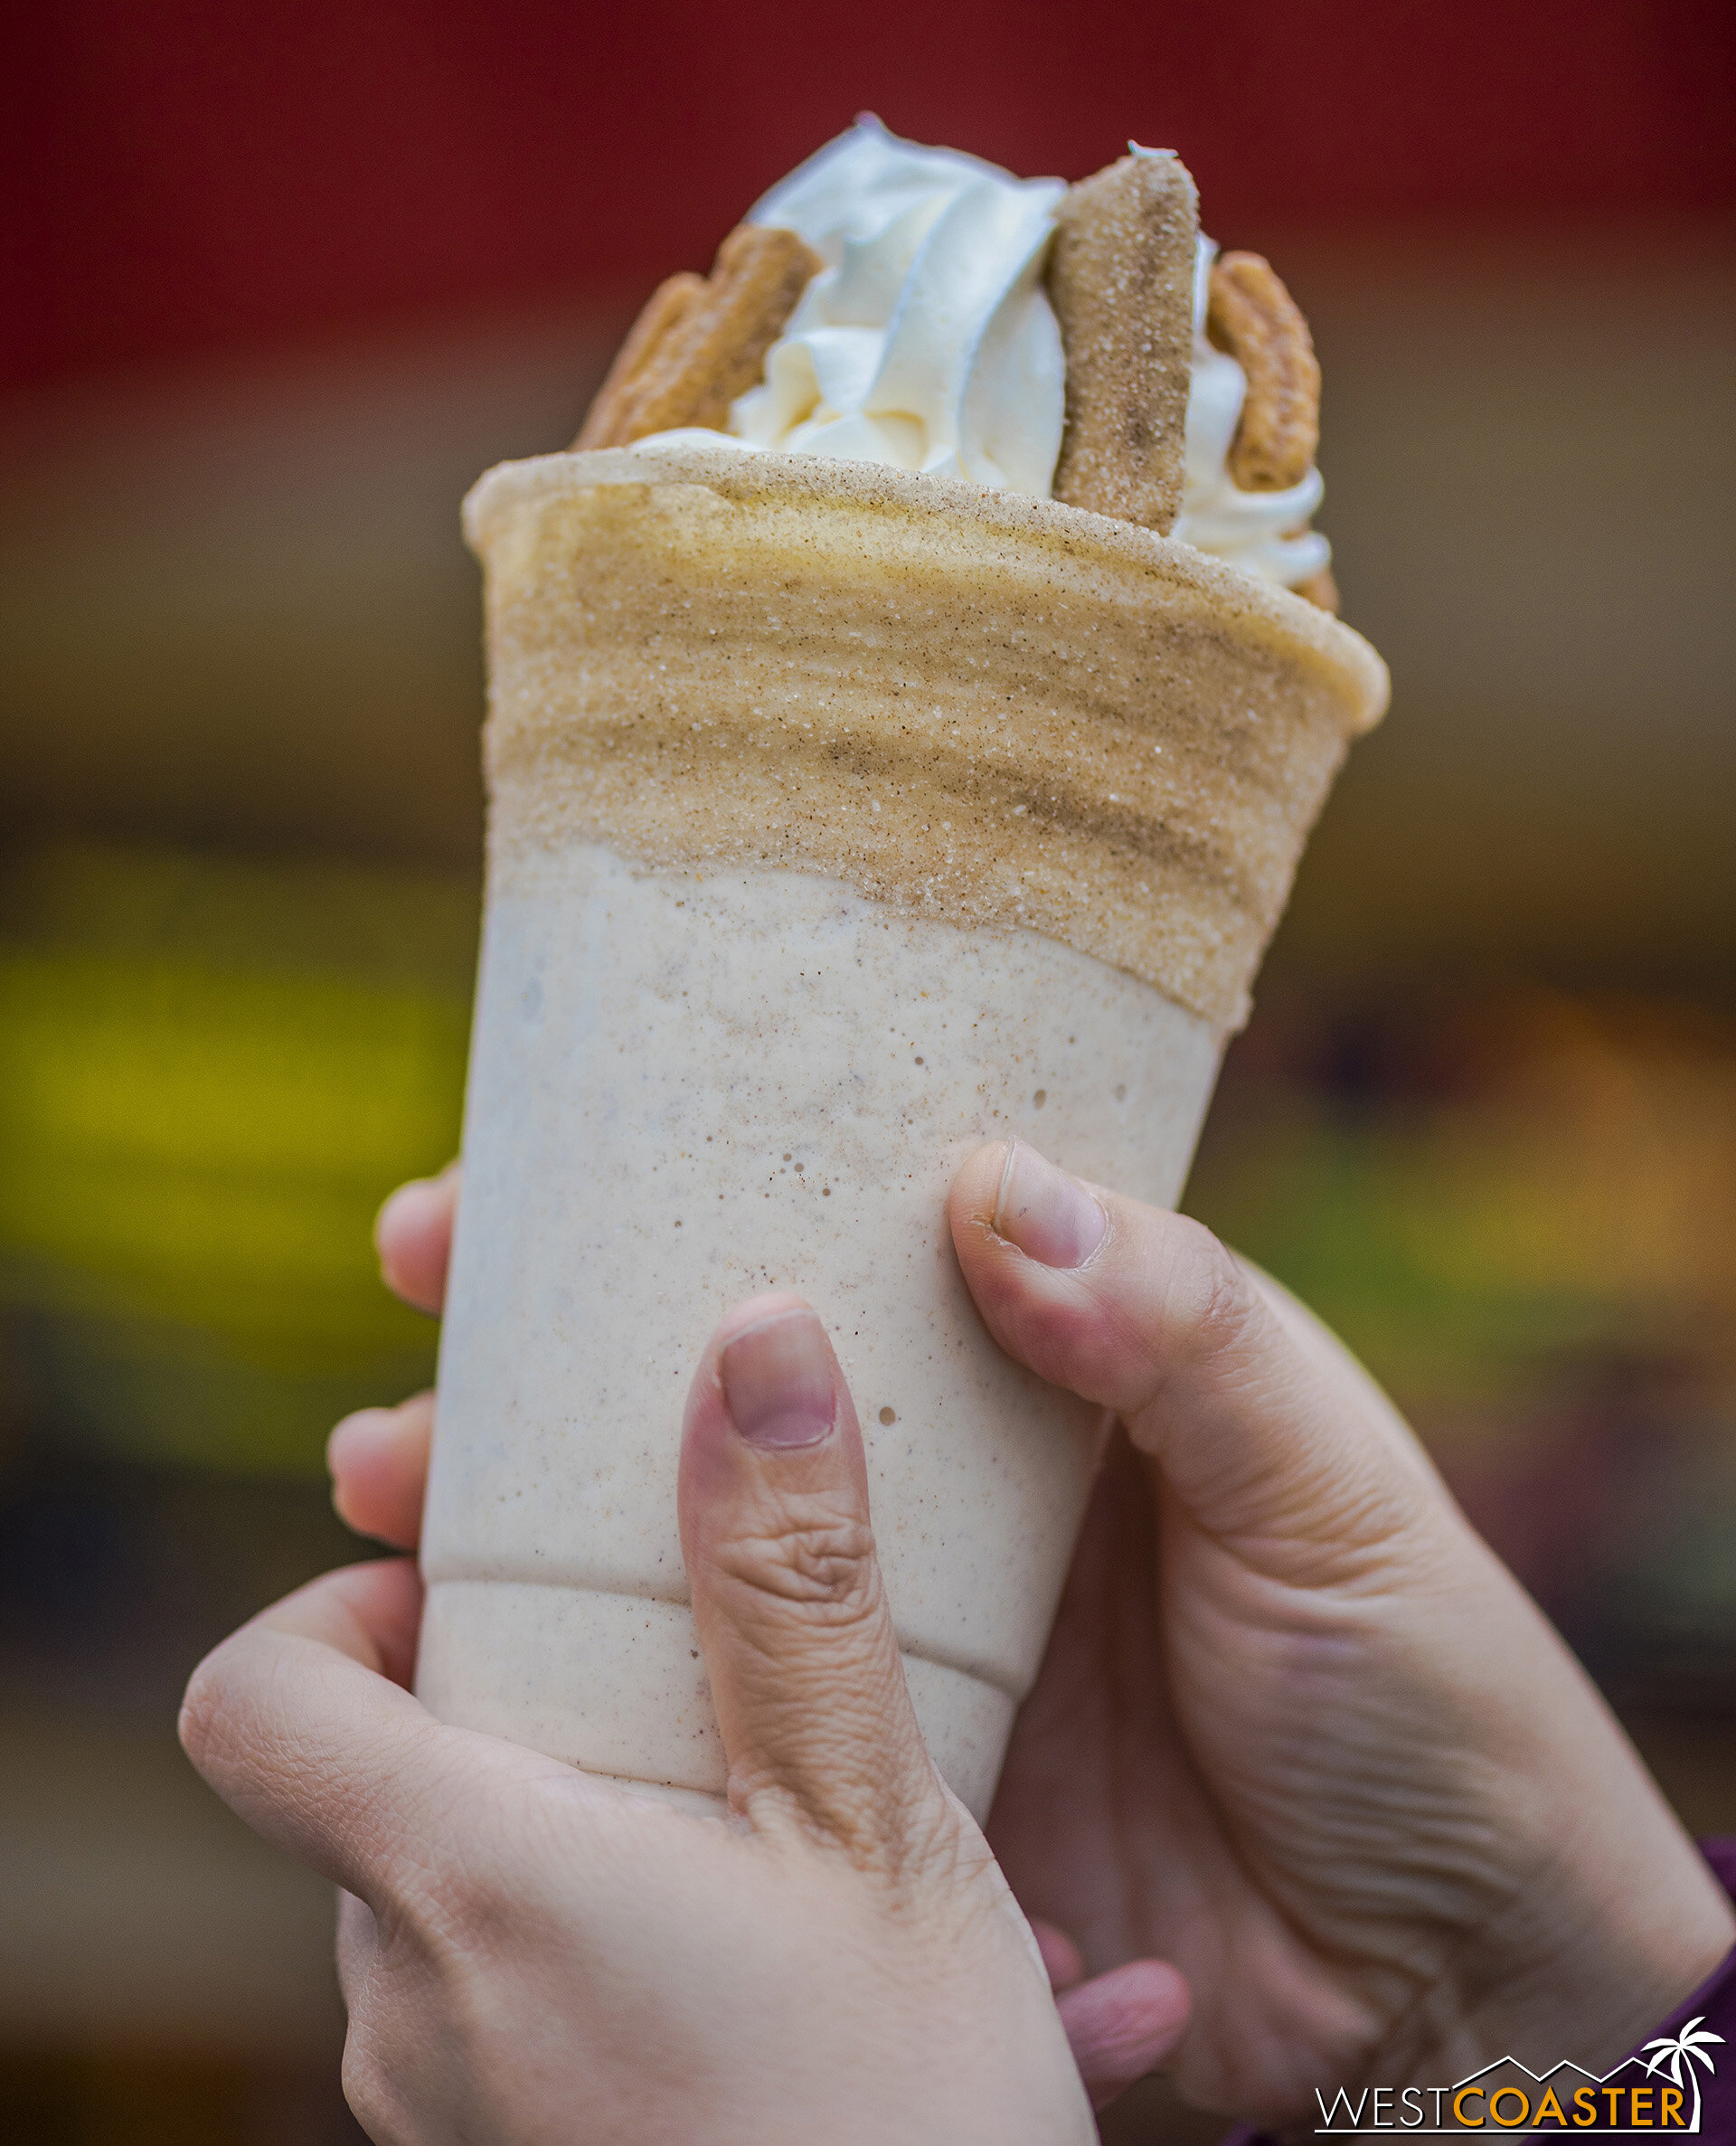  The Churro Shake from Schmoozies is legitimately delicious.  I do wish there was a little more shake and less whipped cream, though.  But this is a near universal hit.  I mean, it’s churro!  In drinkable form! 